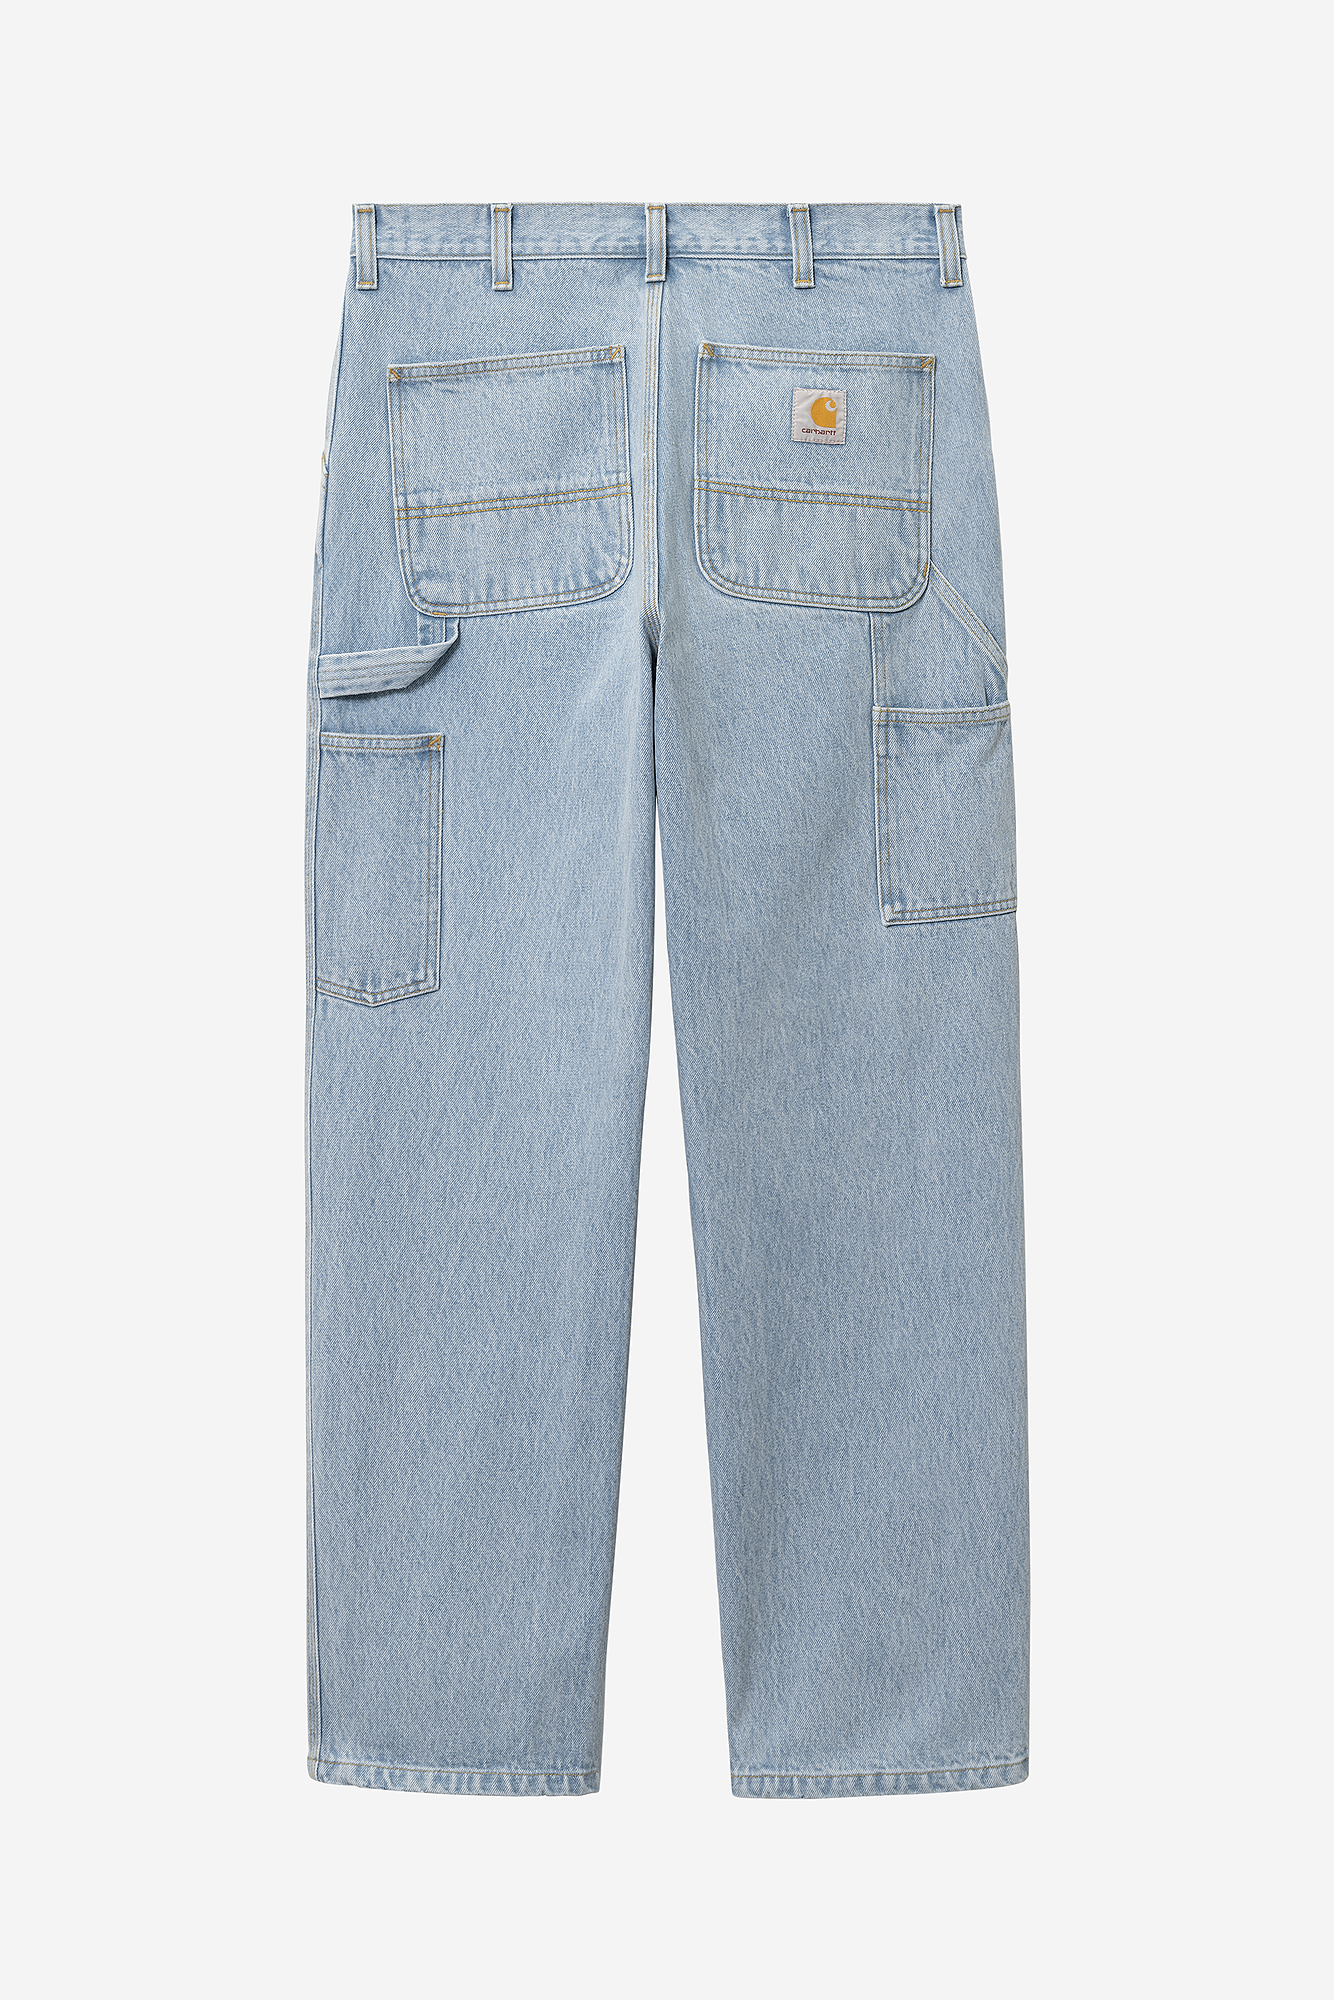 Carhartt WIP Single Knee Pant 100% Cotton rinsed and heavy stone bleached Smith Denim